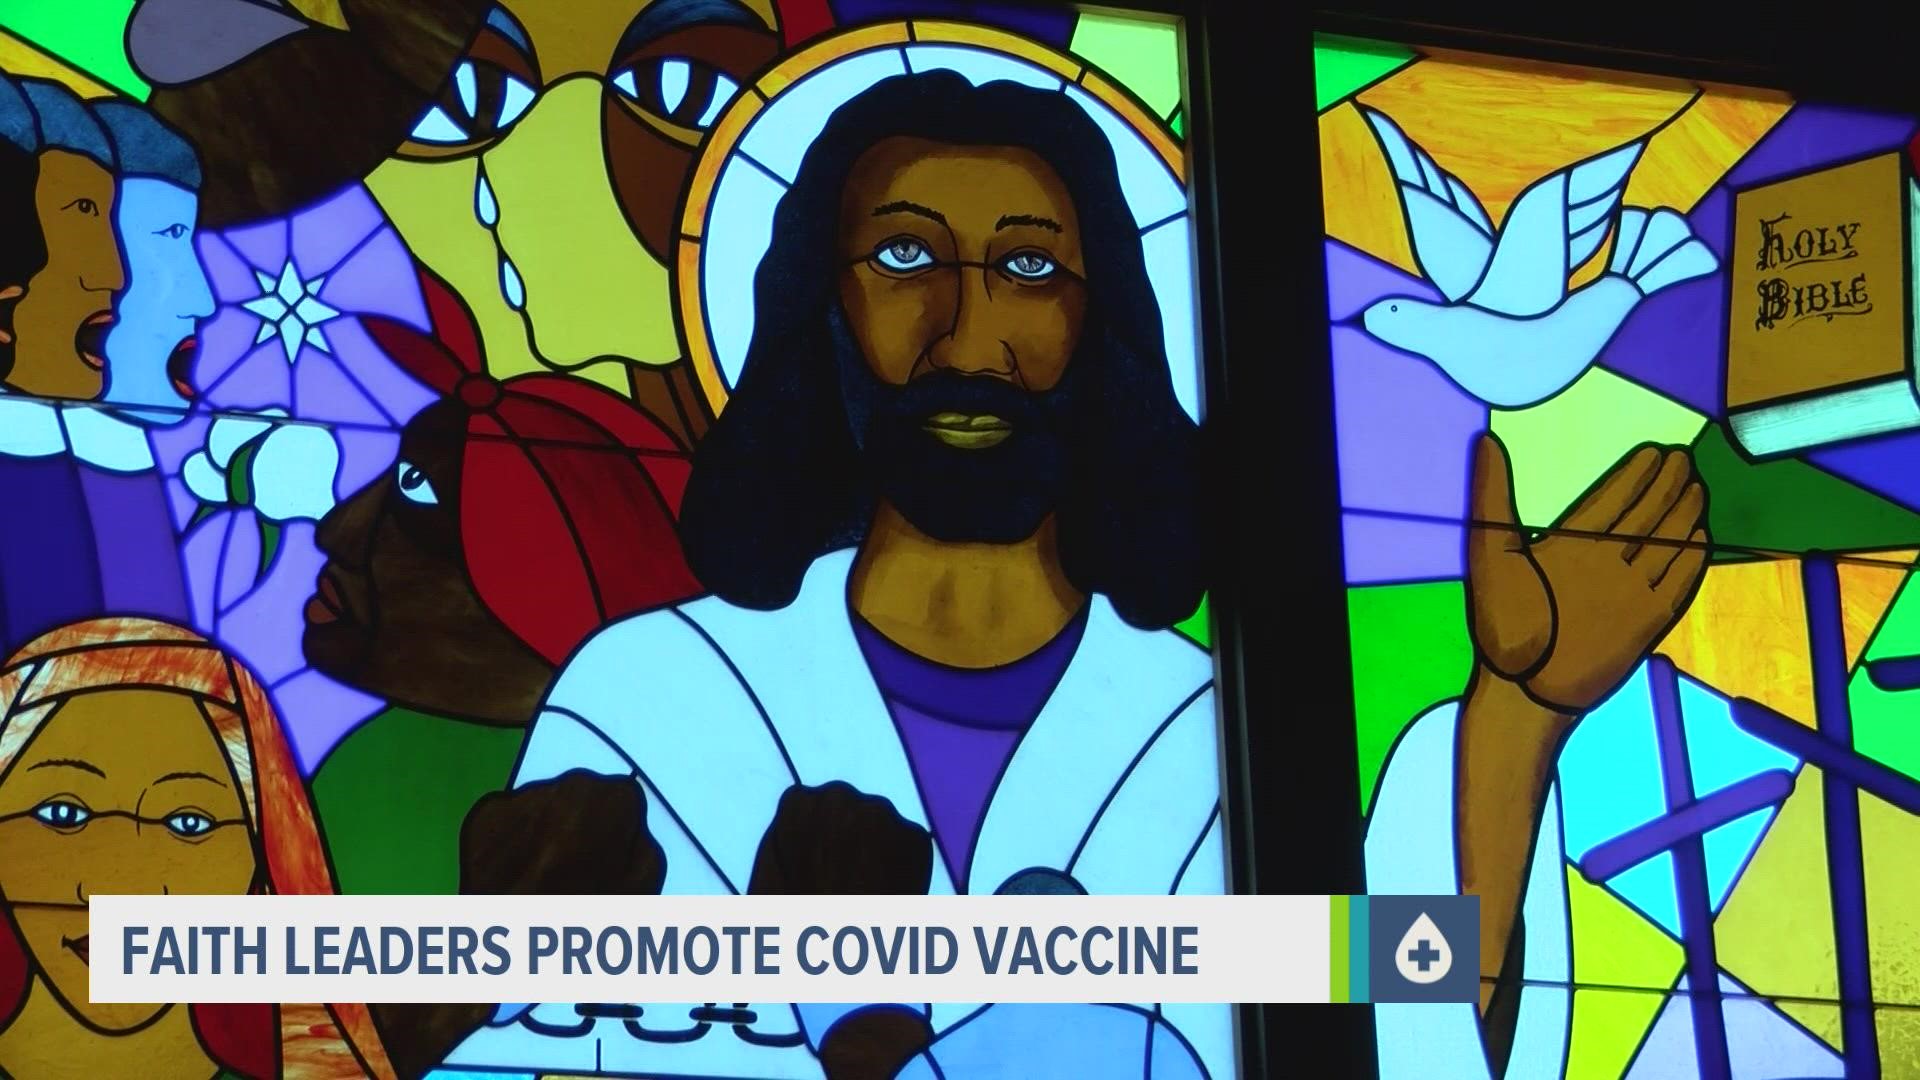 Leaders for Des Moines faith communities have launched a public awareness campaign to increase trust in vaccines among minority populations.